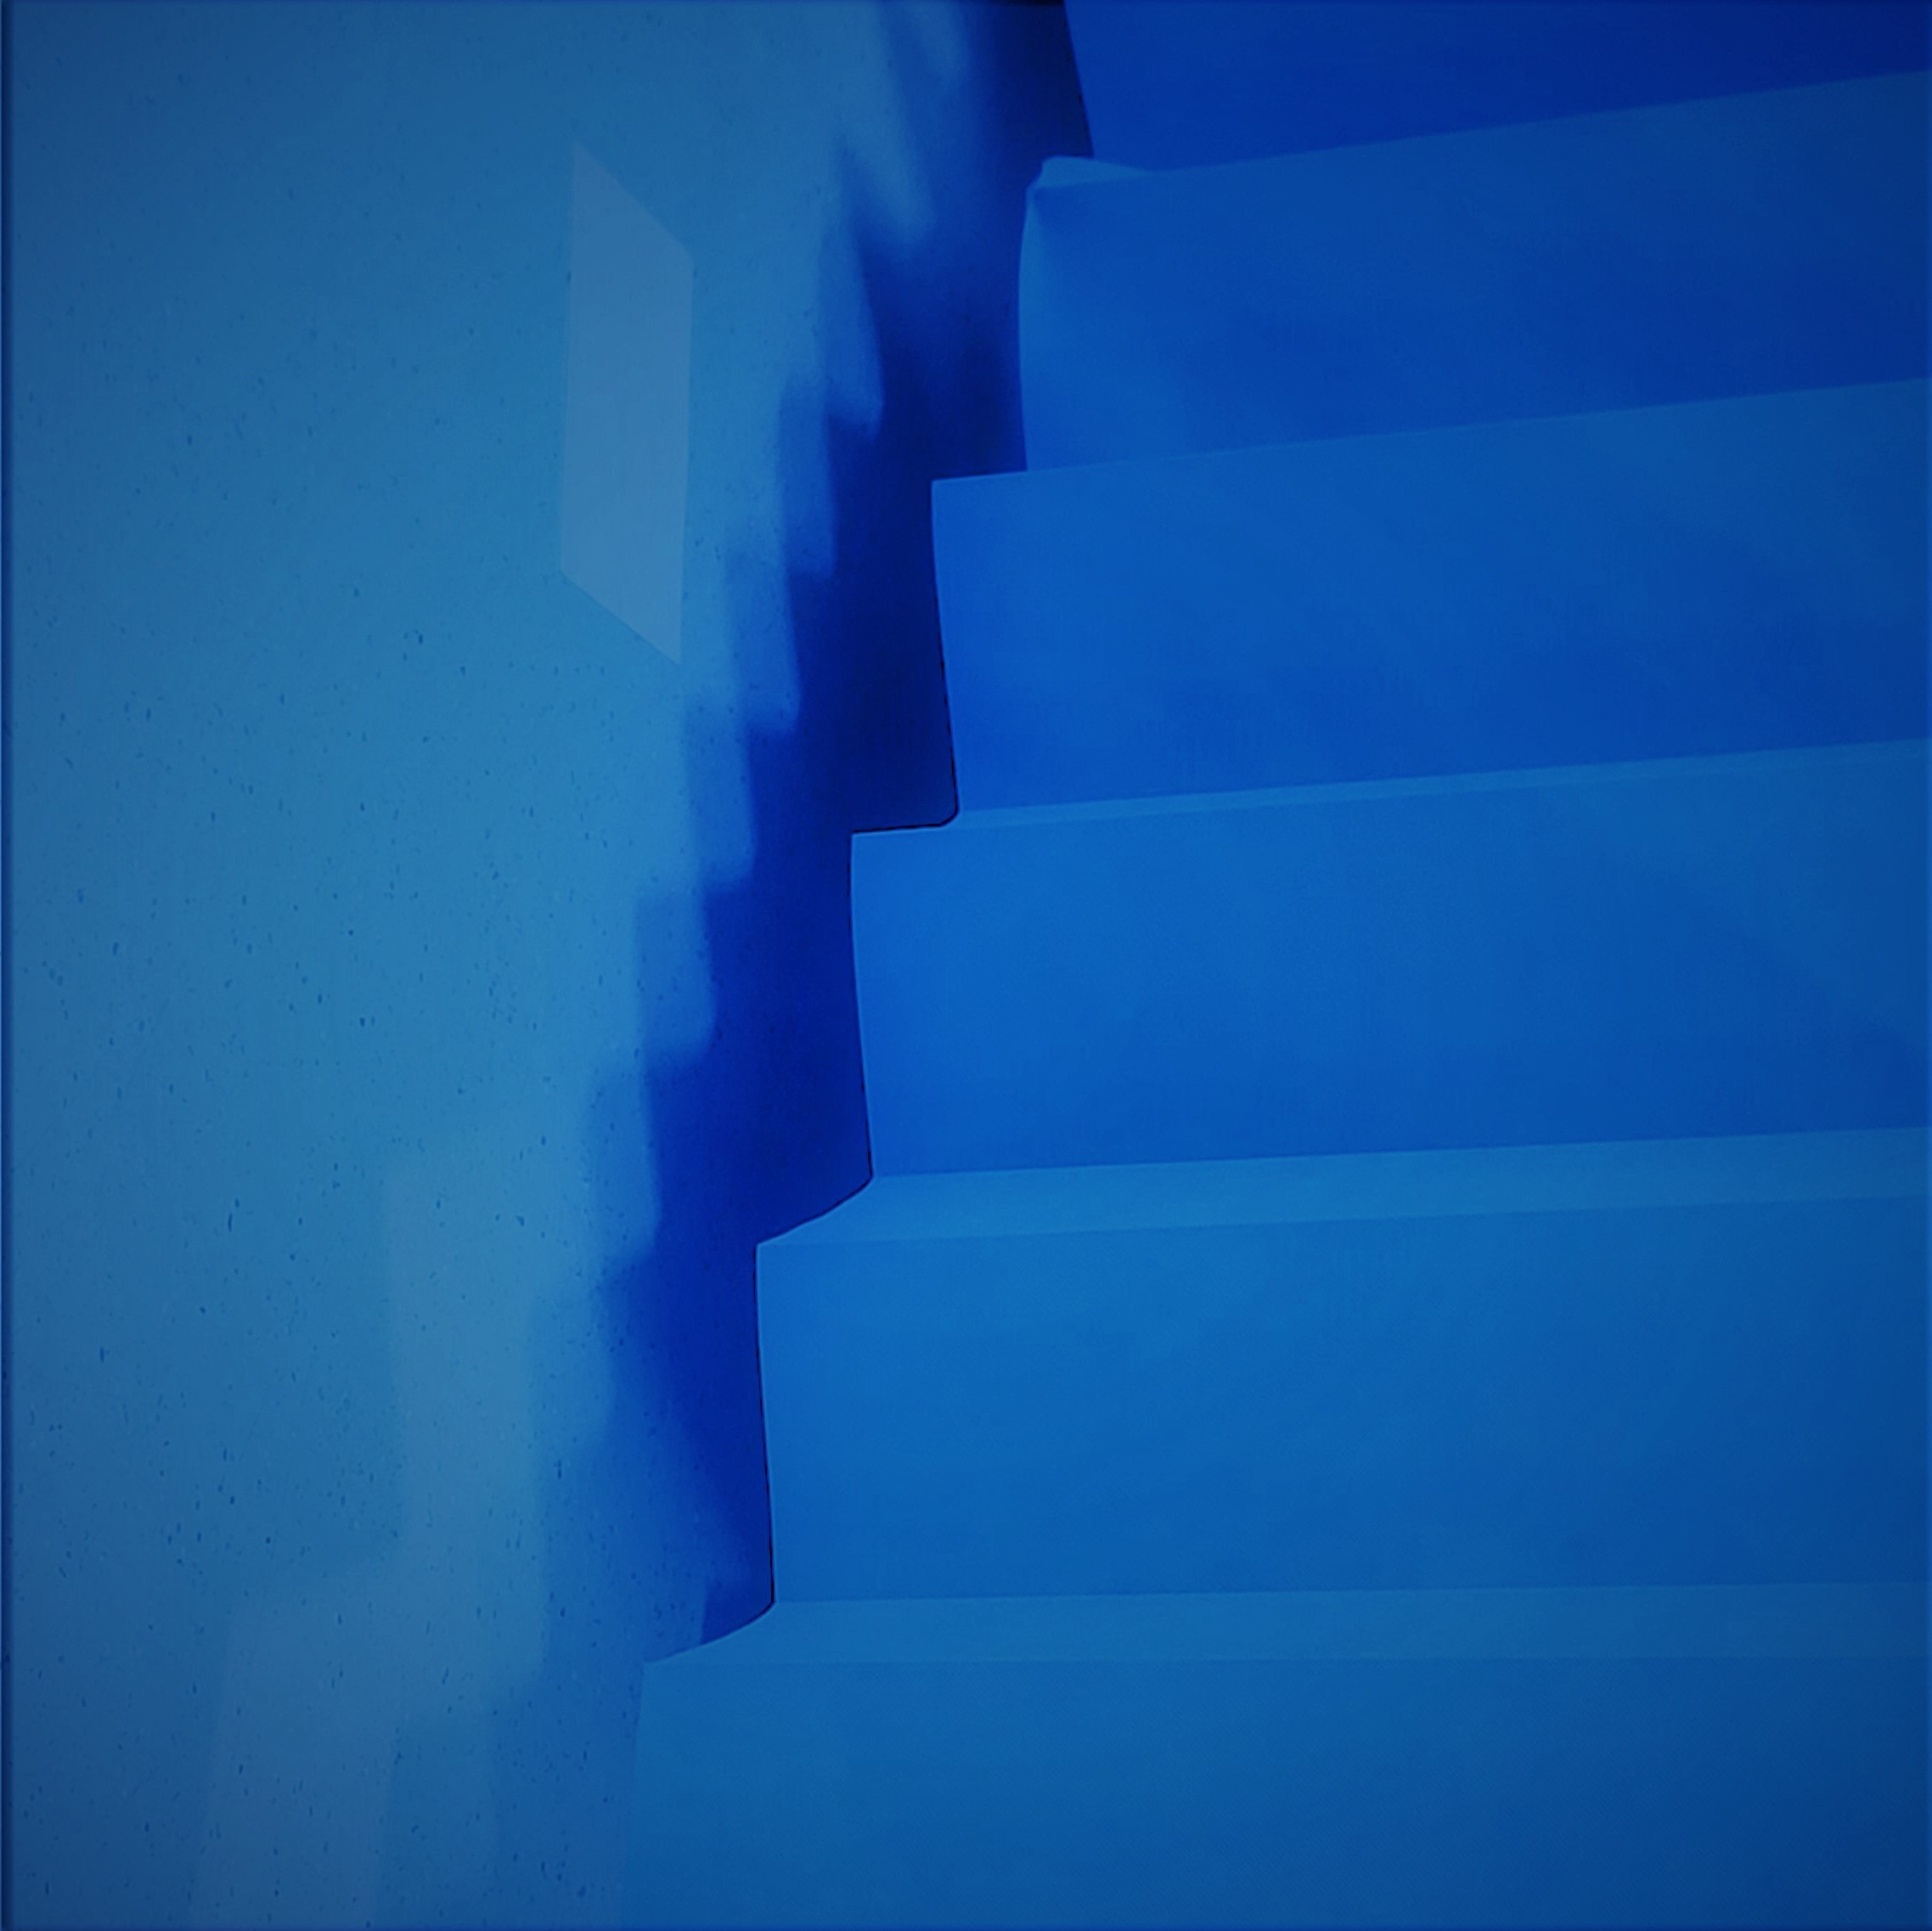 A staircase leading up to the right corner, with a blue tint.